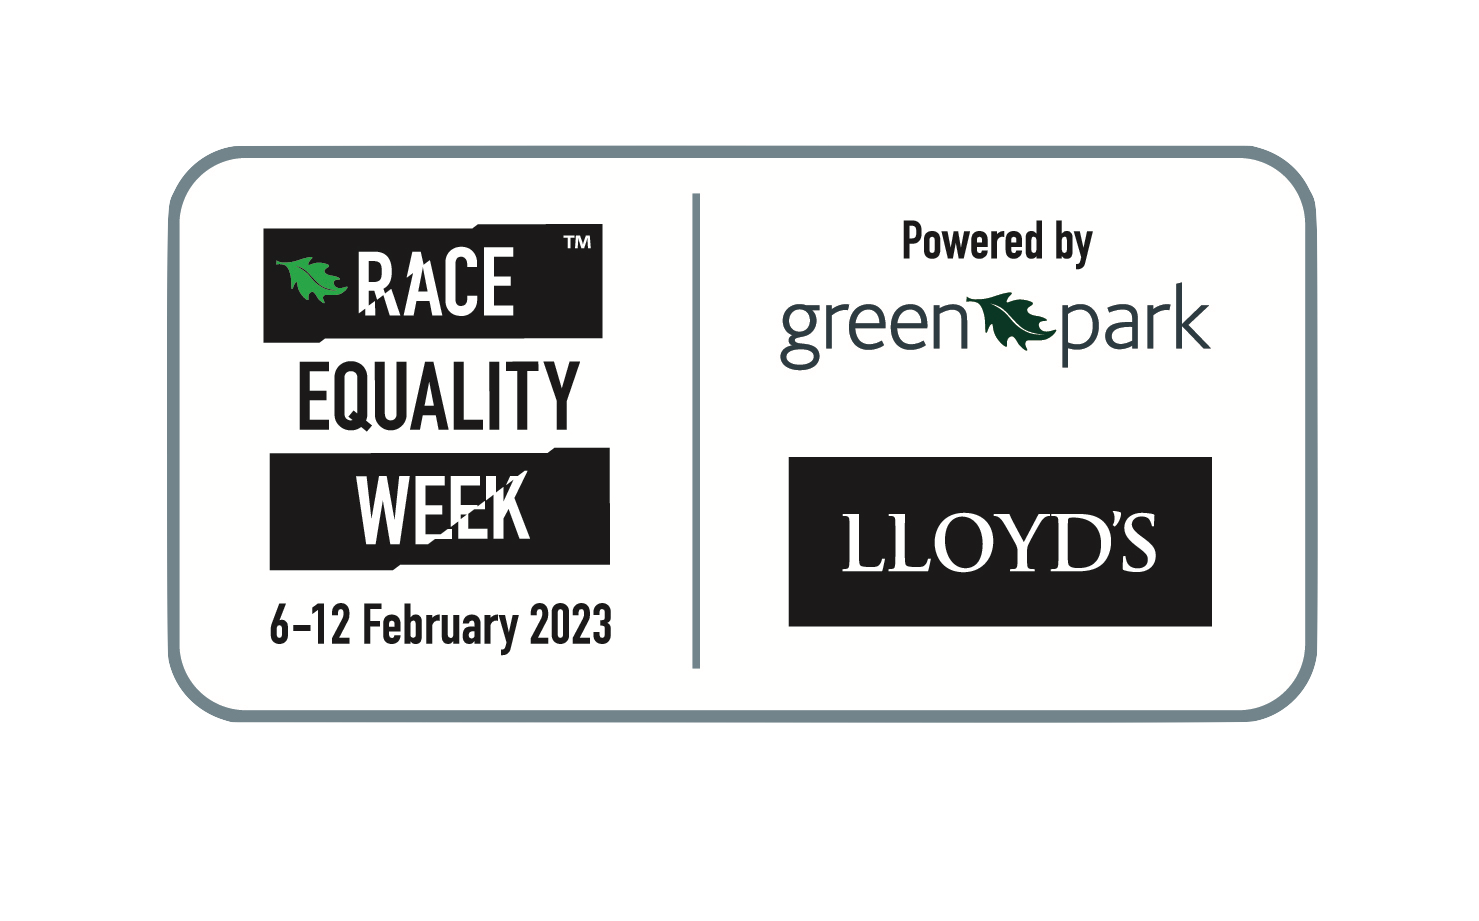 Race equality week powered by Lloyds